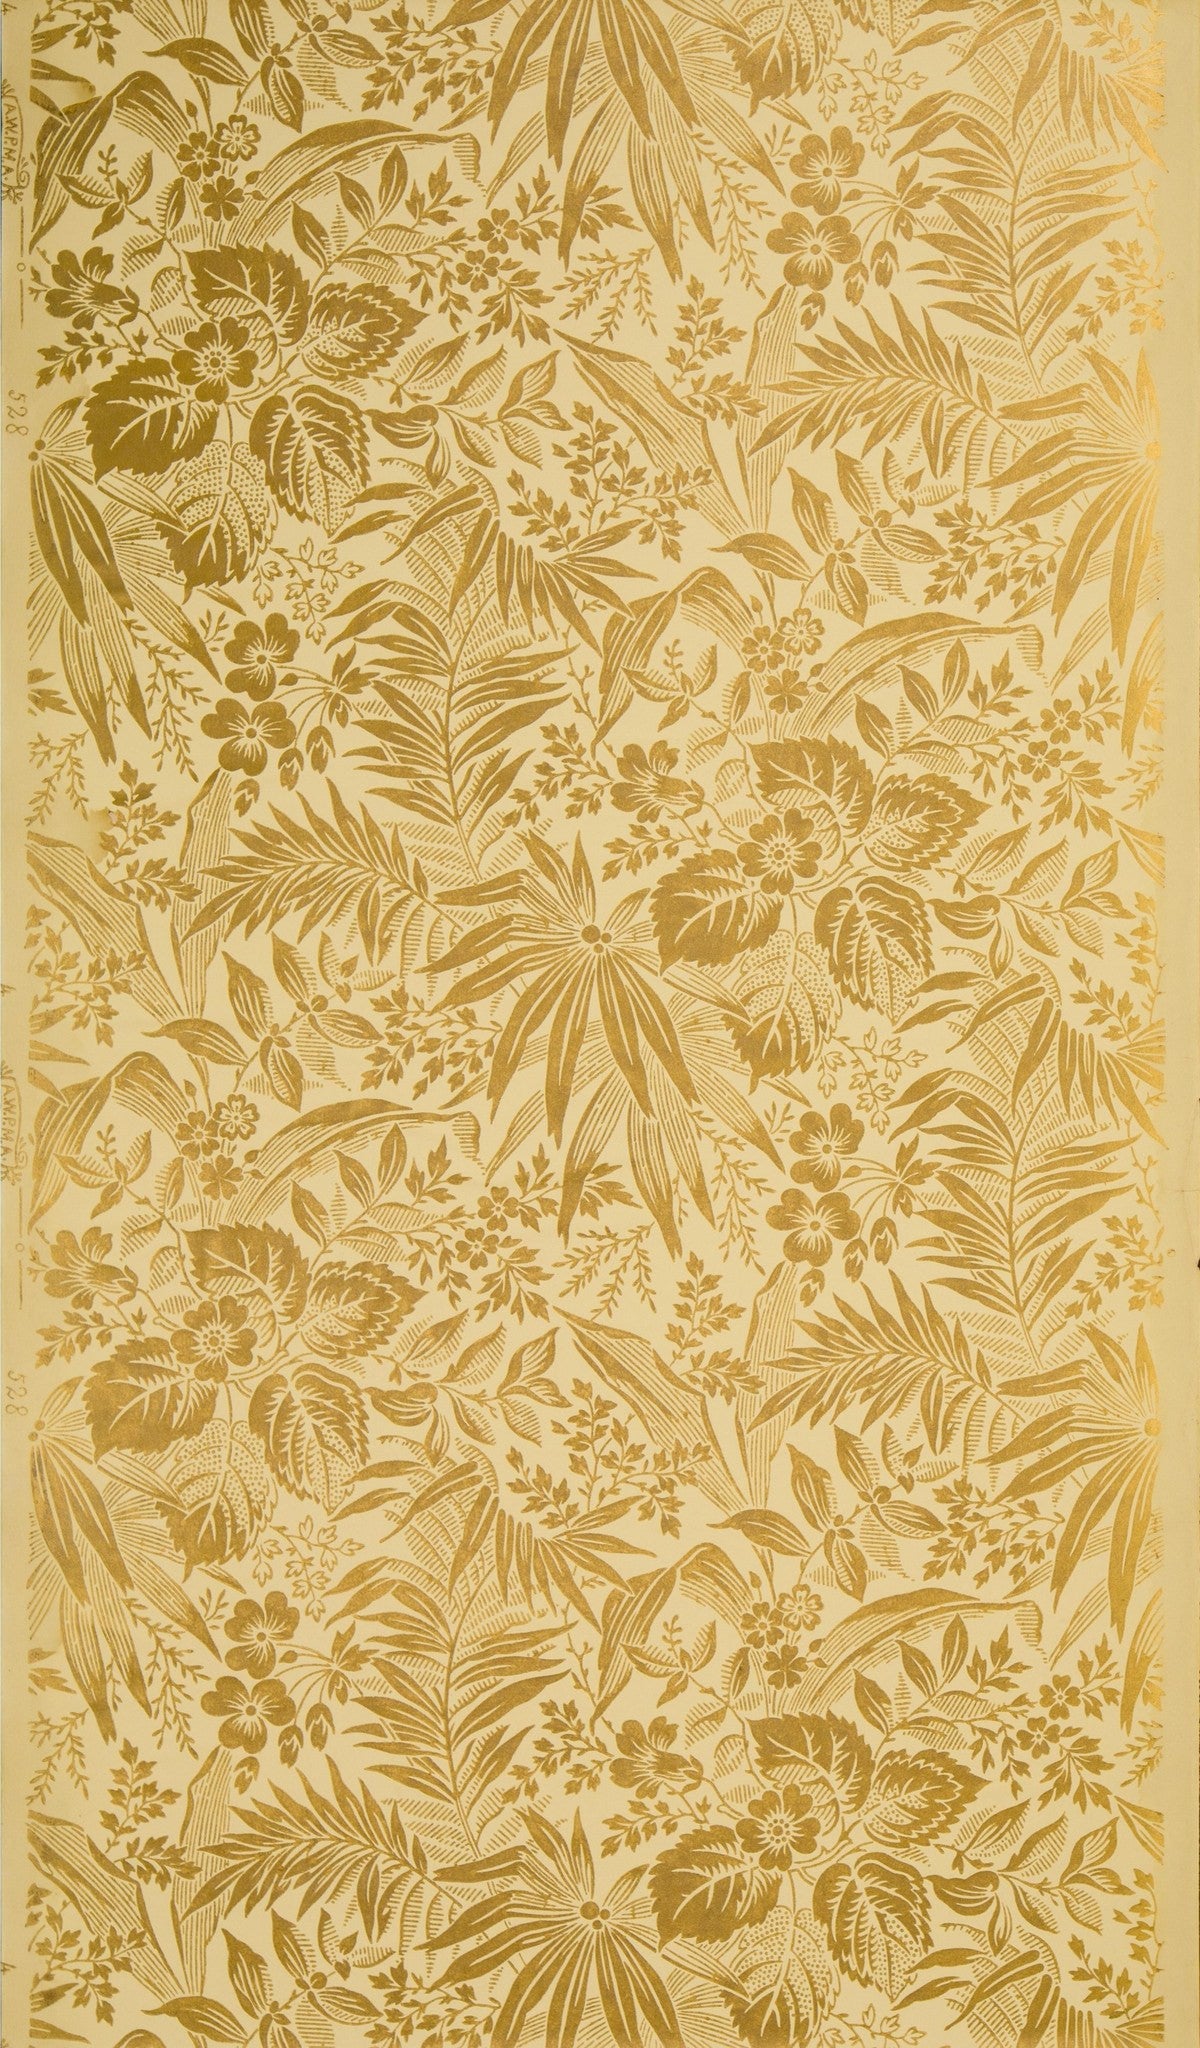 Gilt Flowers and Leaves - Antique Wallpaper Remnant